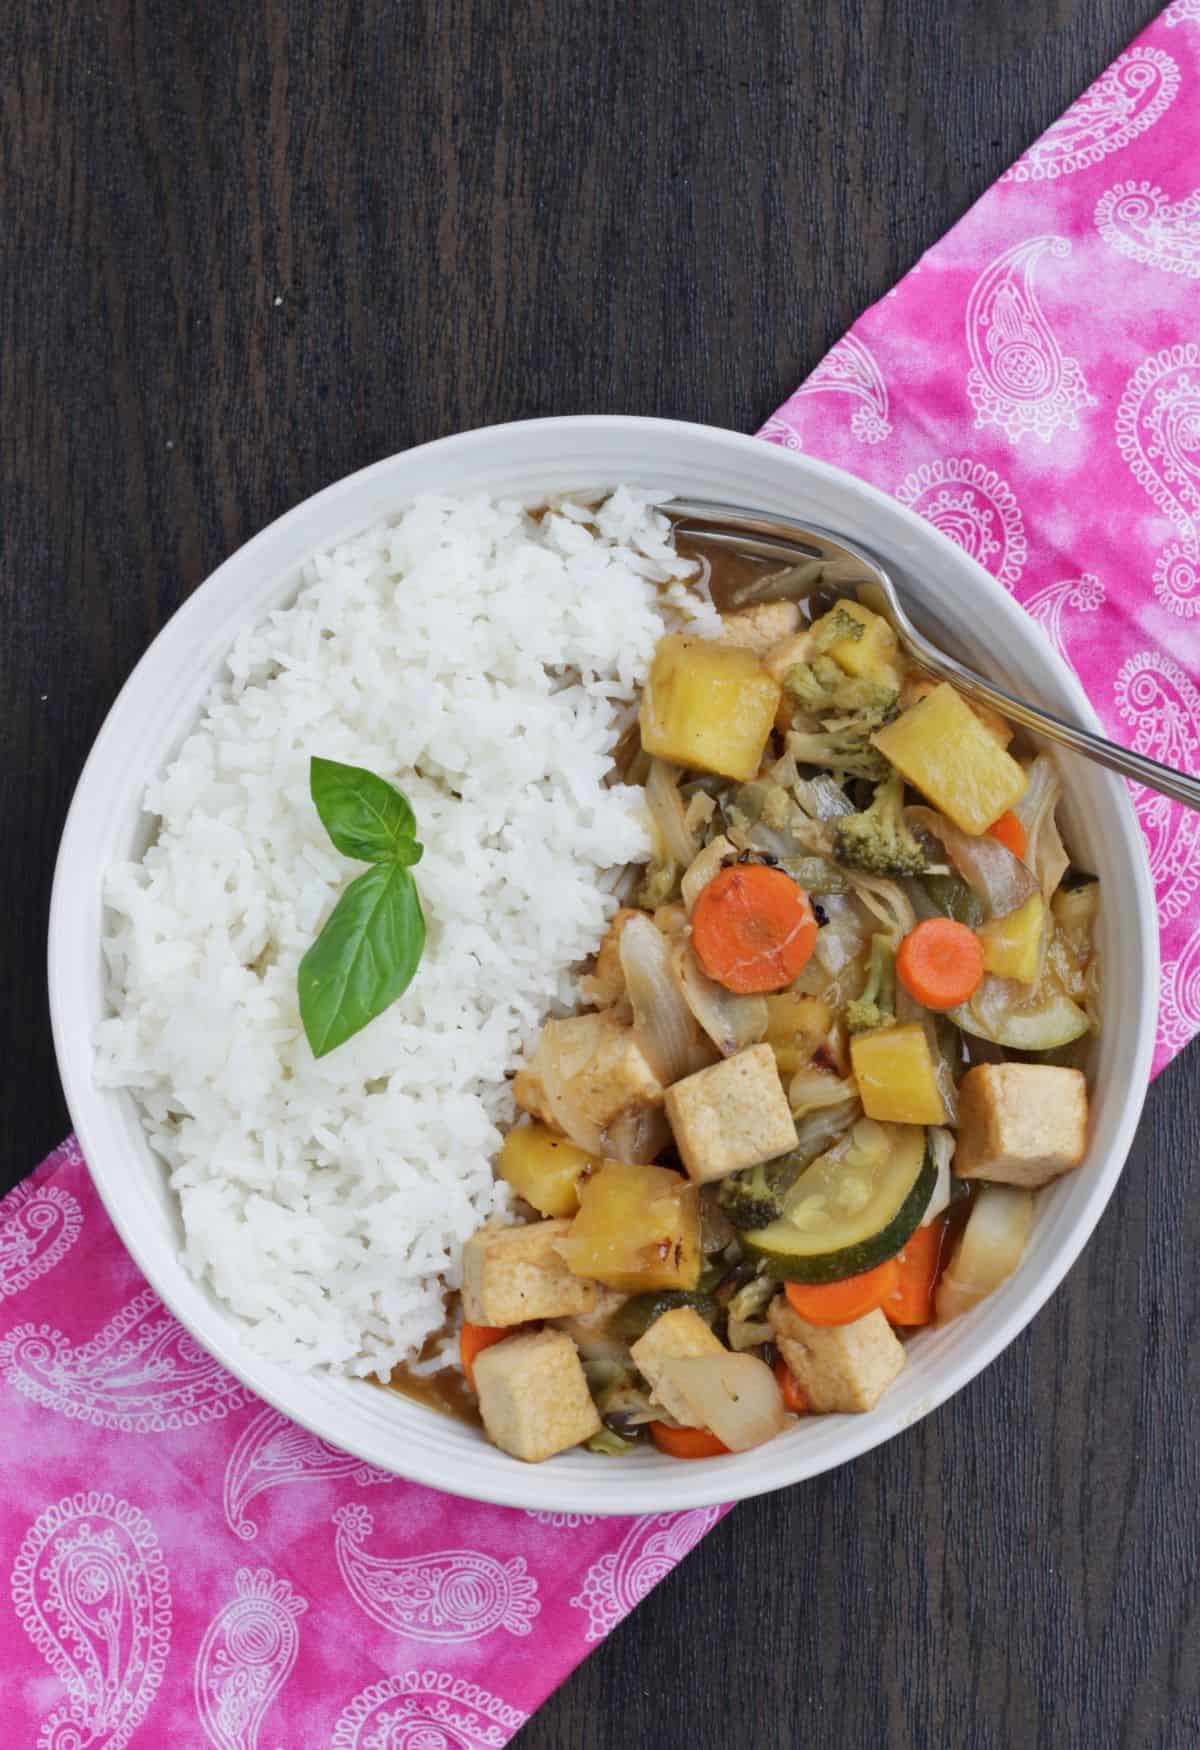 sweet and sour vegetables with tofu and served with rice